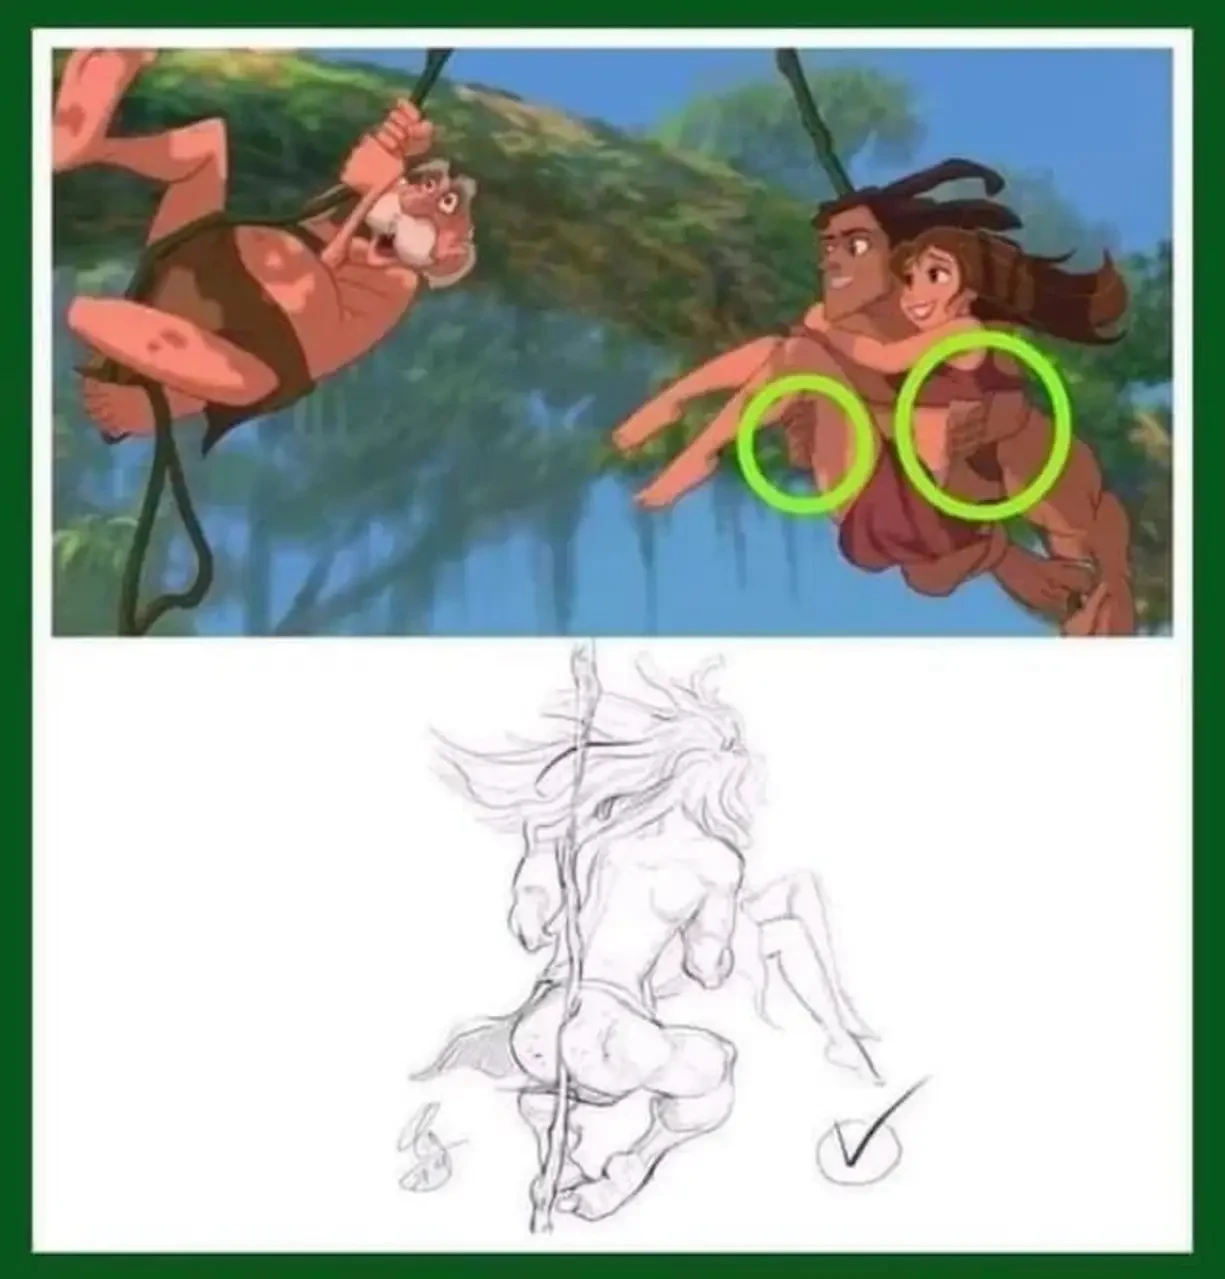 A screenshot from the original Tarzan cartoon movie. Tarzan is swinging attached to jungle vines, but he is also holding Jane with both arms. The question on everyone's mind is how can he hold onto the vine?

A sketch below the screenshot shows Tarzan from the back, using his buttcheeks to clench around the vine.